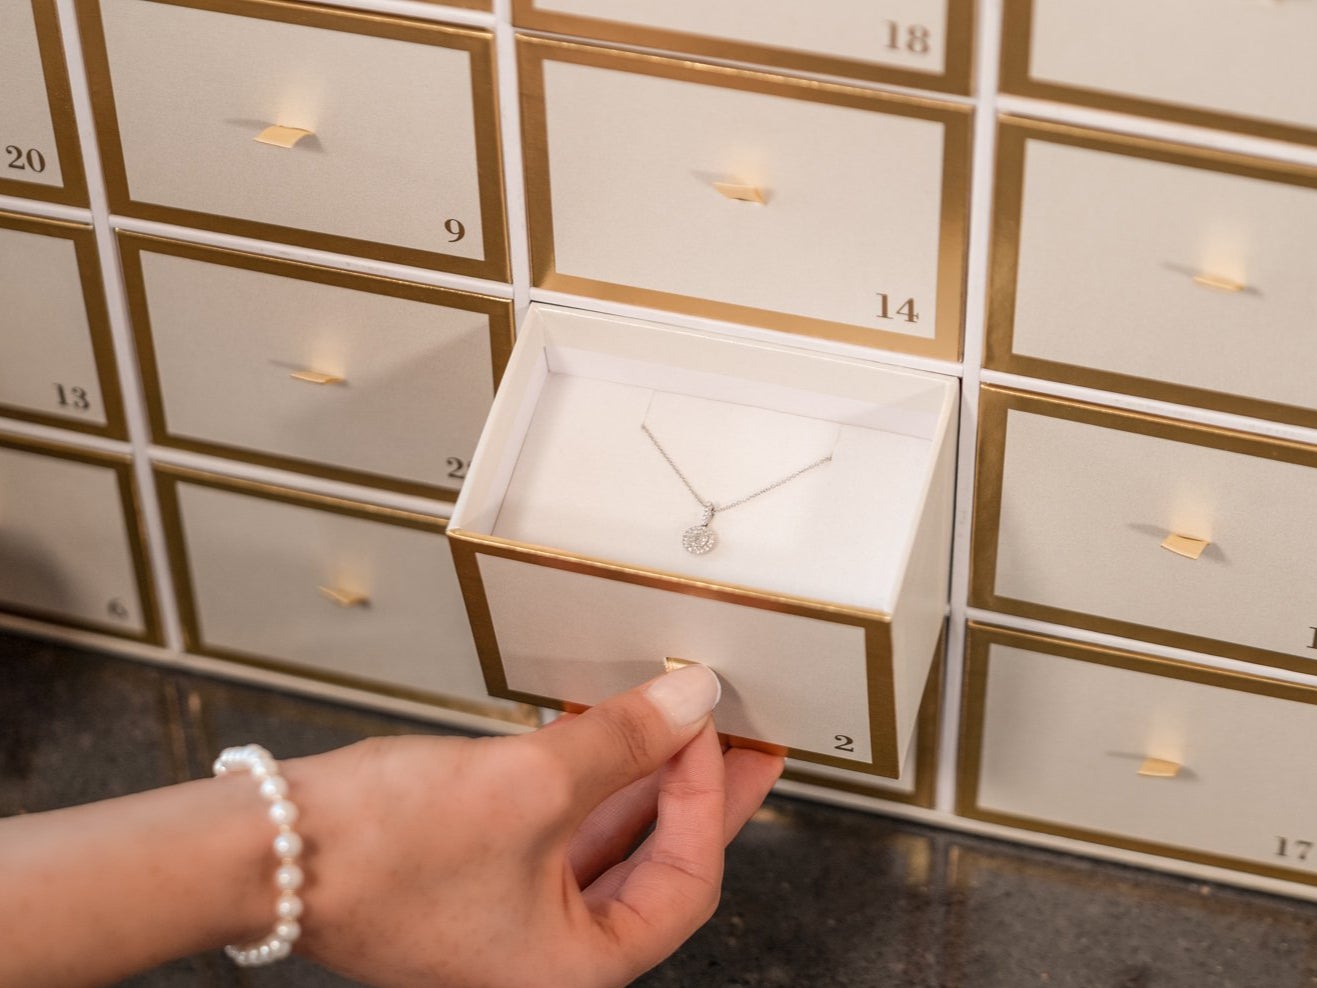 This British jeweller is selling an advent calendar for £20,000